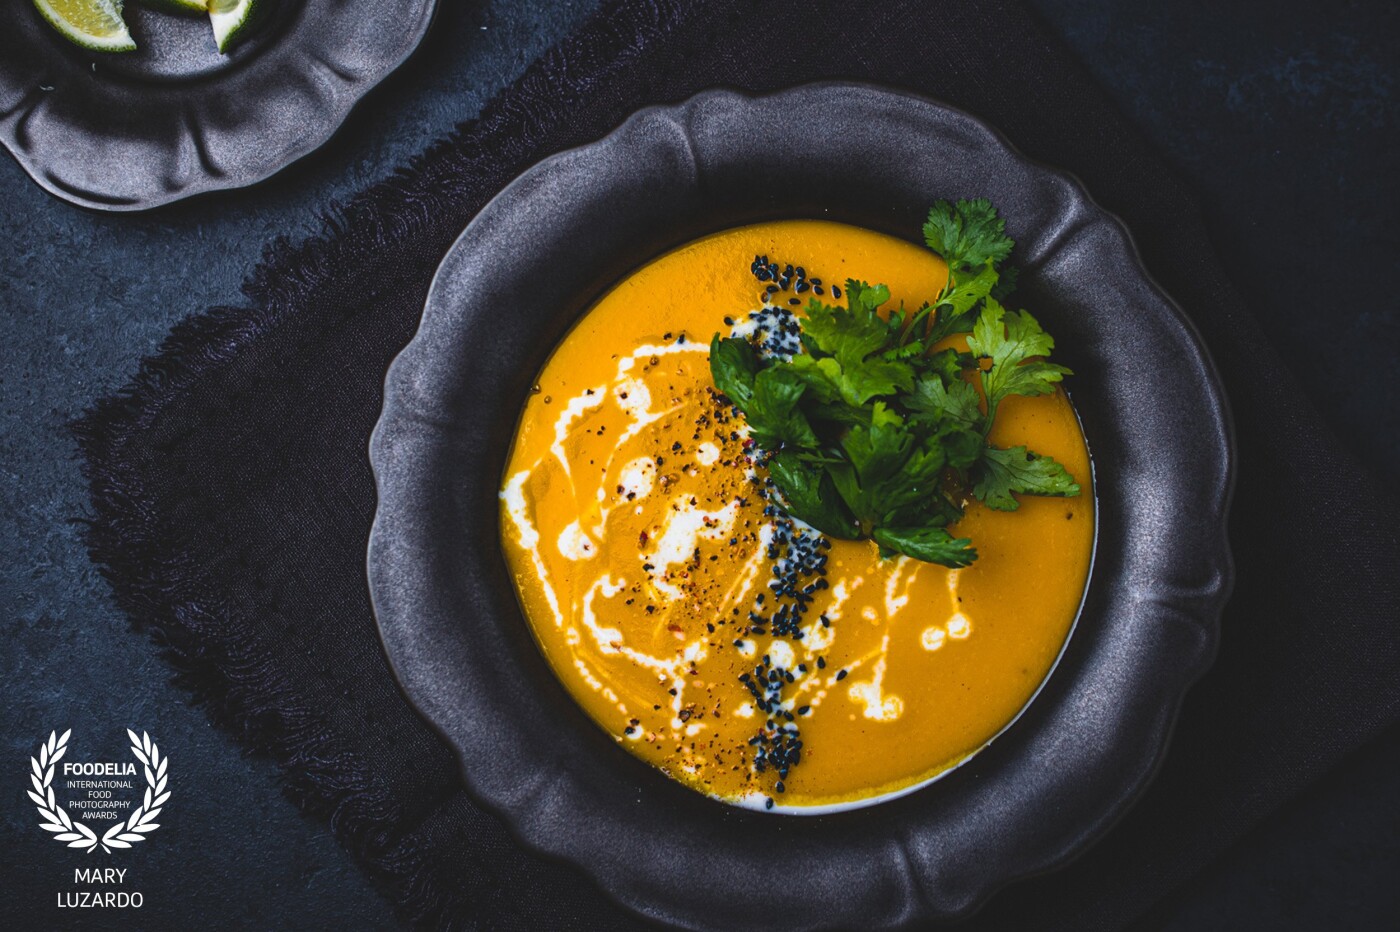 This Creamy Coconut Ginger Carrot Soup is Our way to fight the cold weather during fall and winter days. Plus it is so beautiful and photo-ready. Blended soups can be tricky to photograph. But they have a lot of potentials. Using garnish as a prop in a way I faced this shoot. A drizzle of coconut on top, with some nigella seeds and herbs, added the texture it needed. 